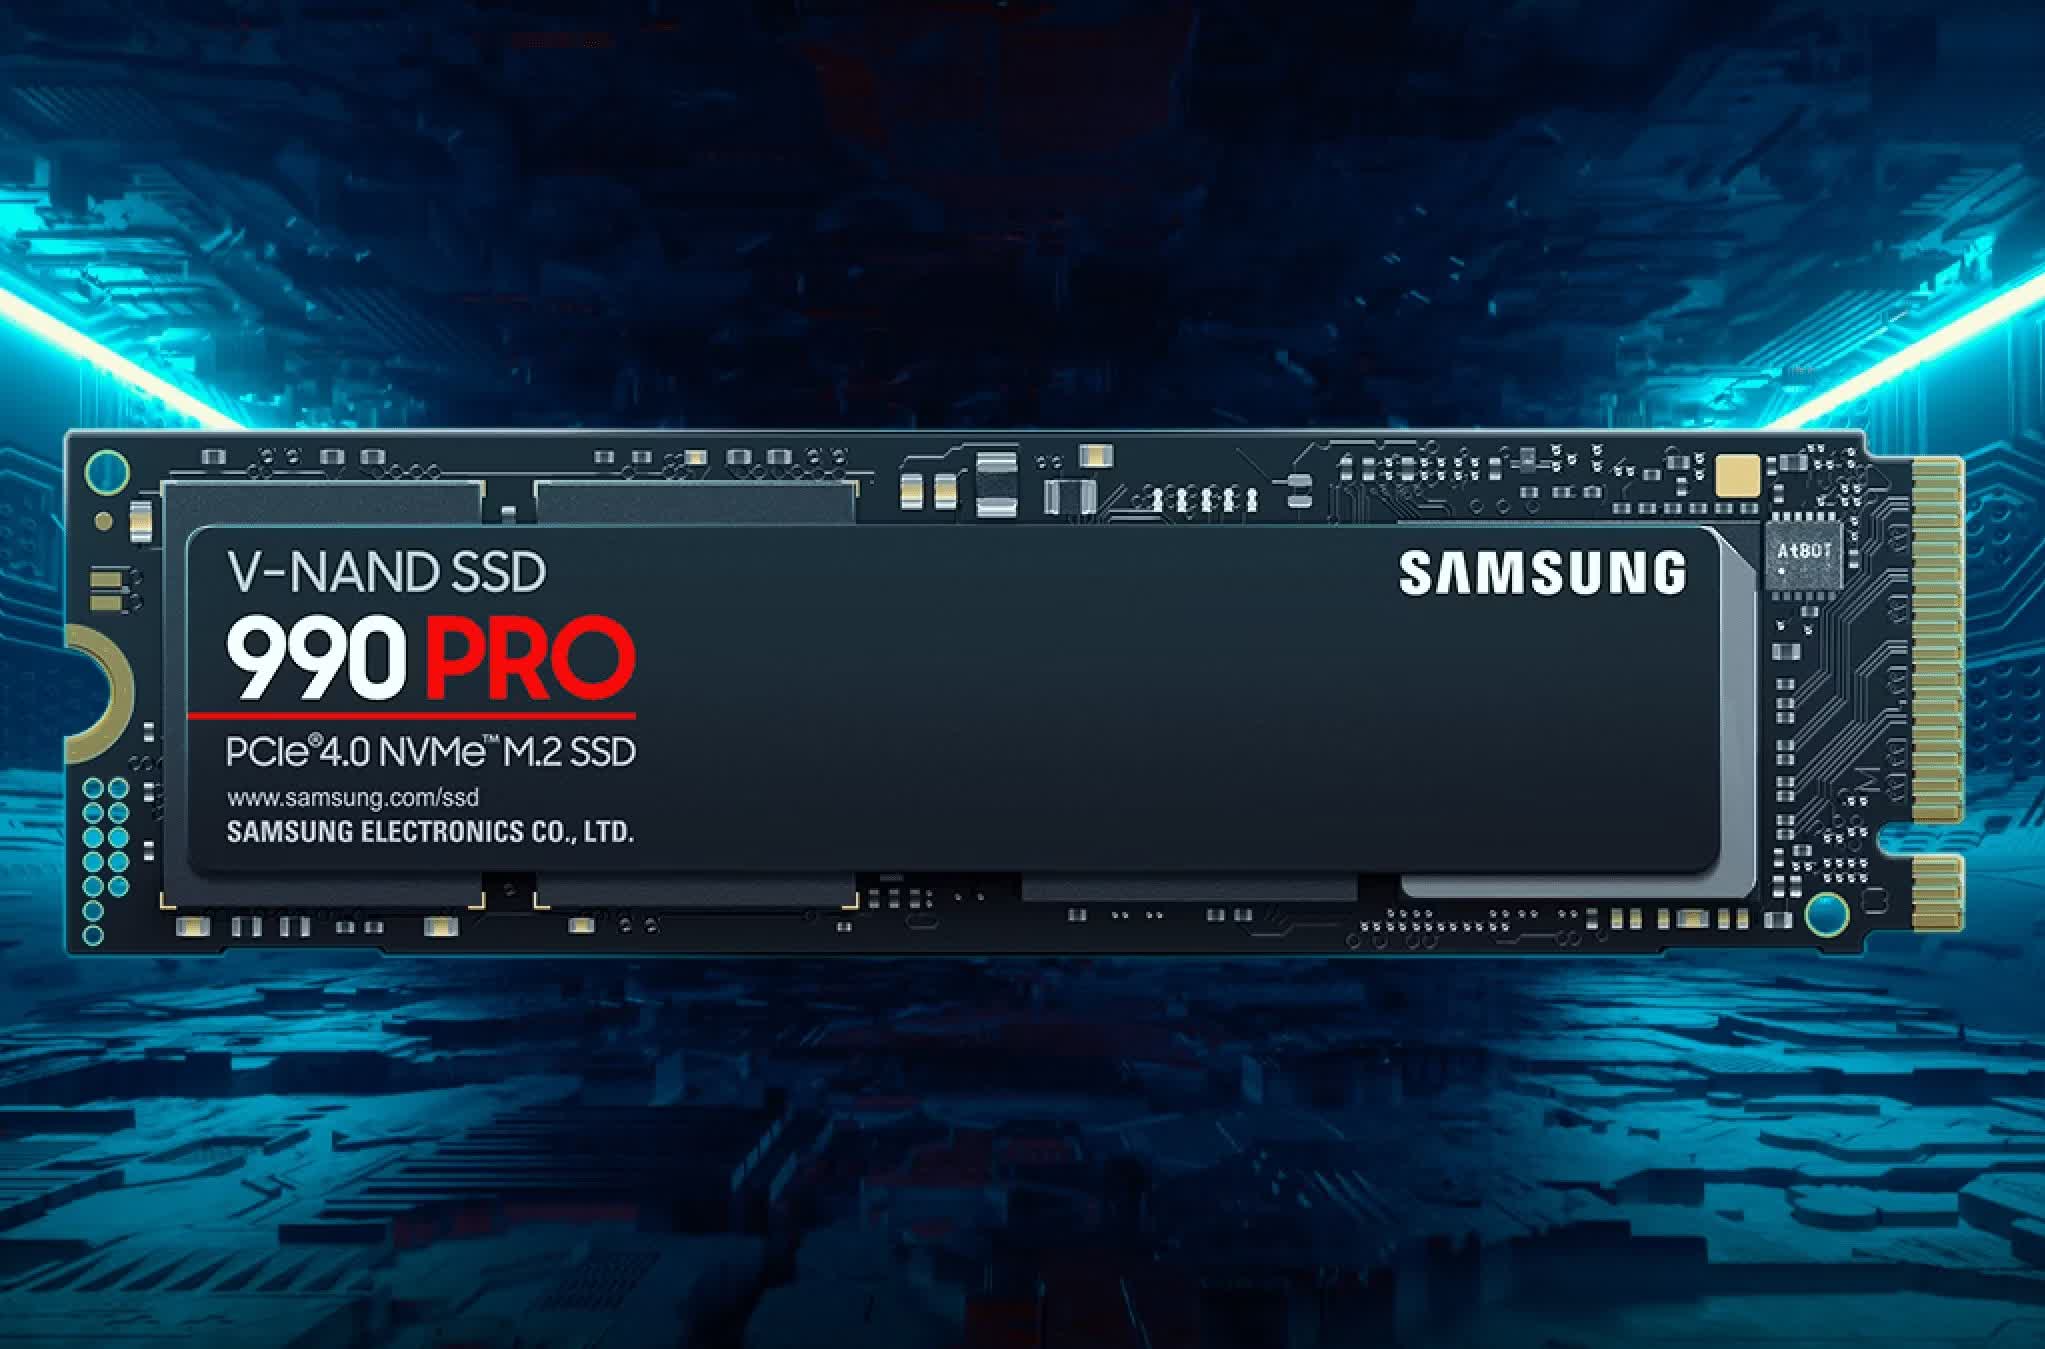 Samsung's 4TB 990 Pro SSD priced at $350 ahead of October launch